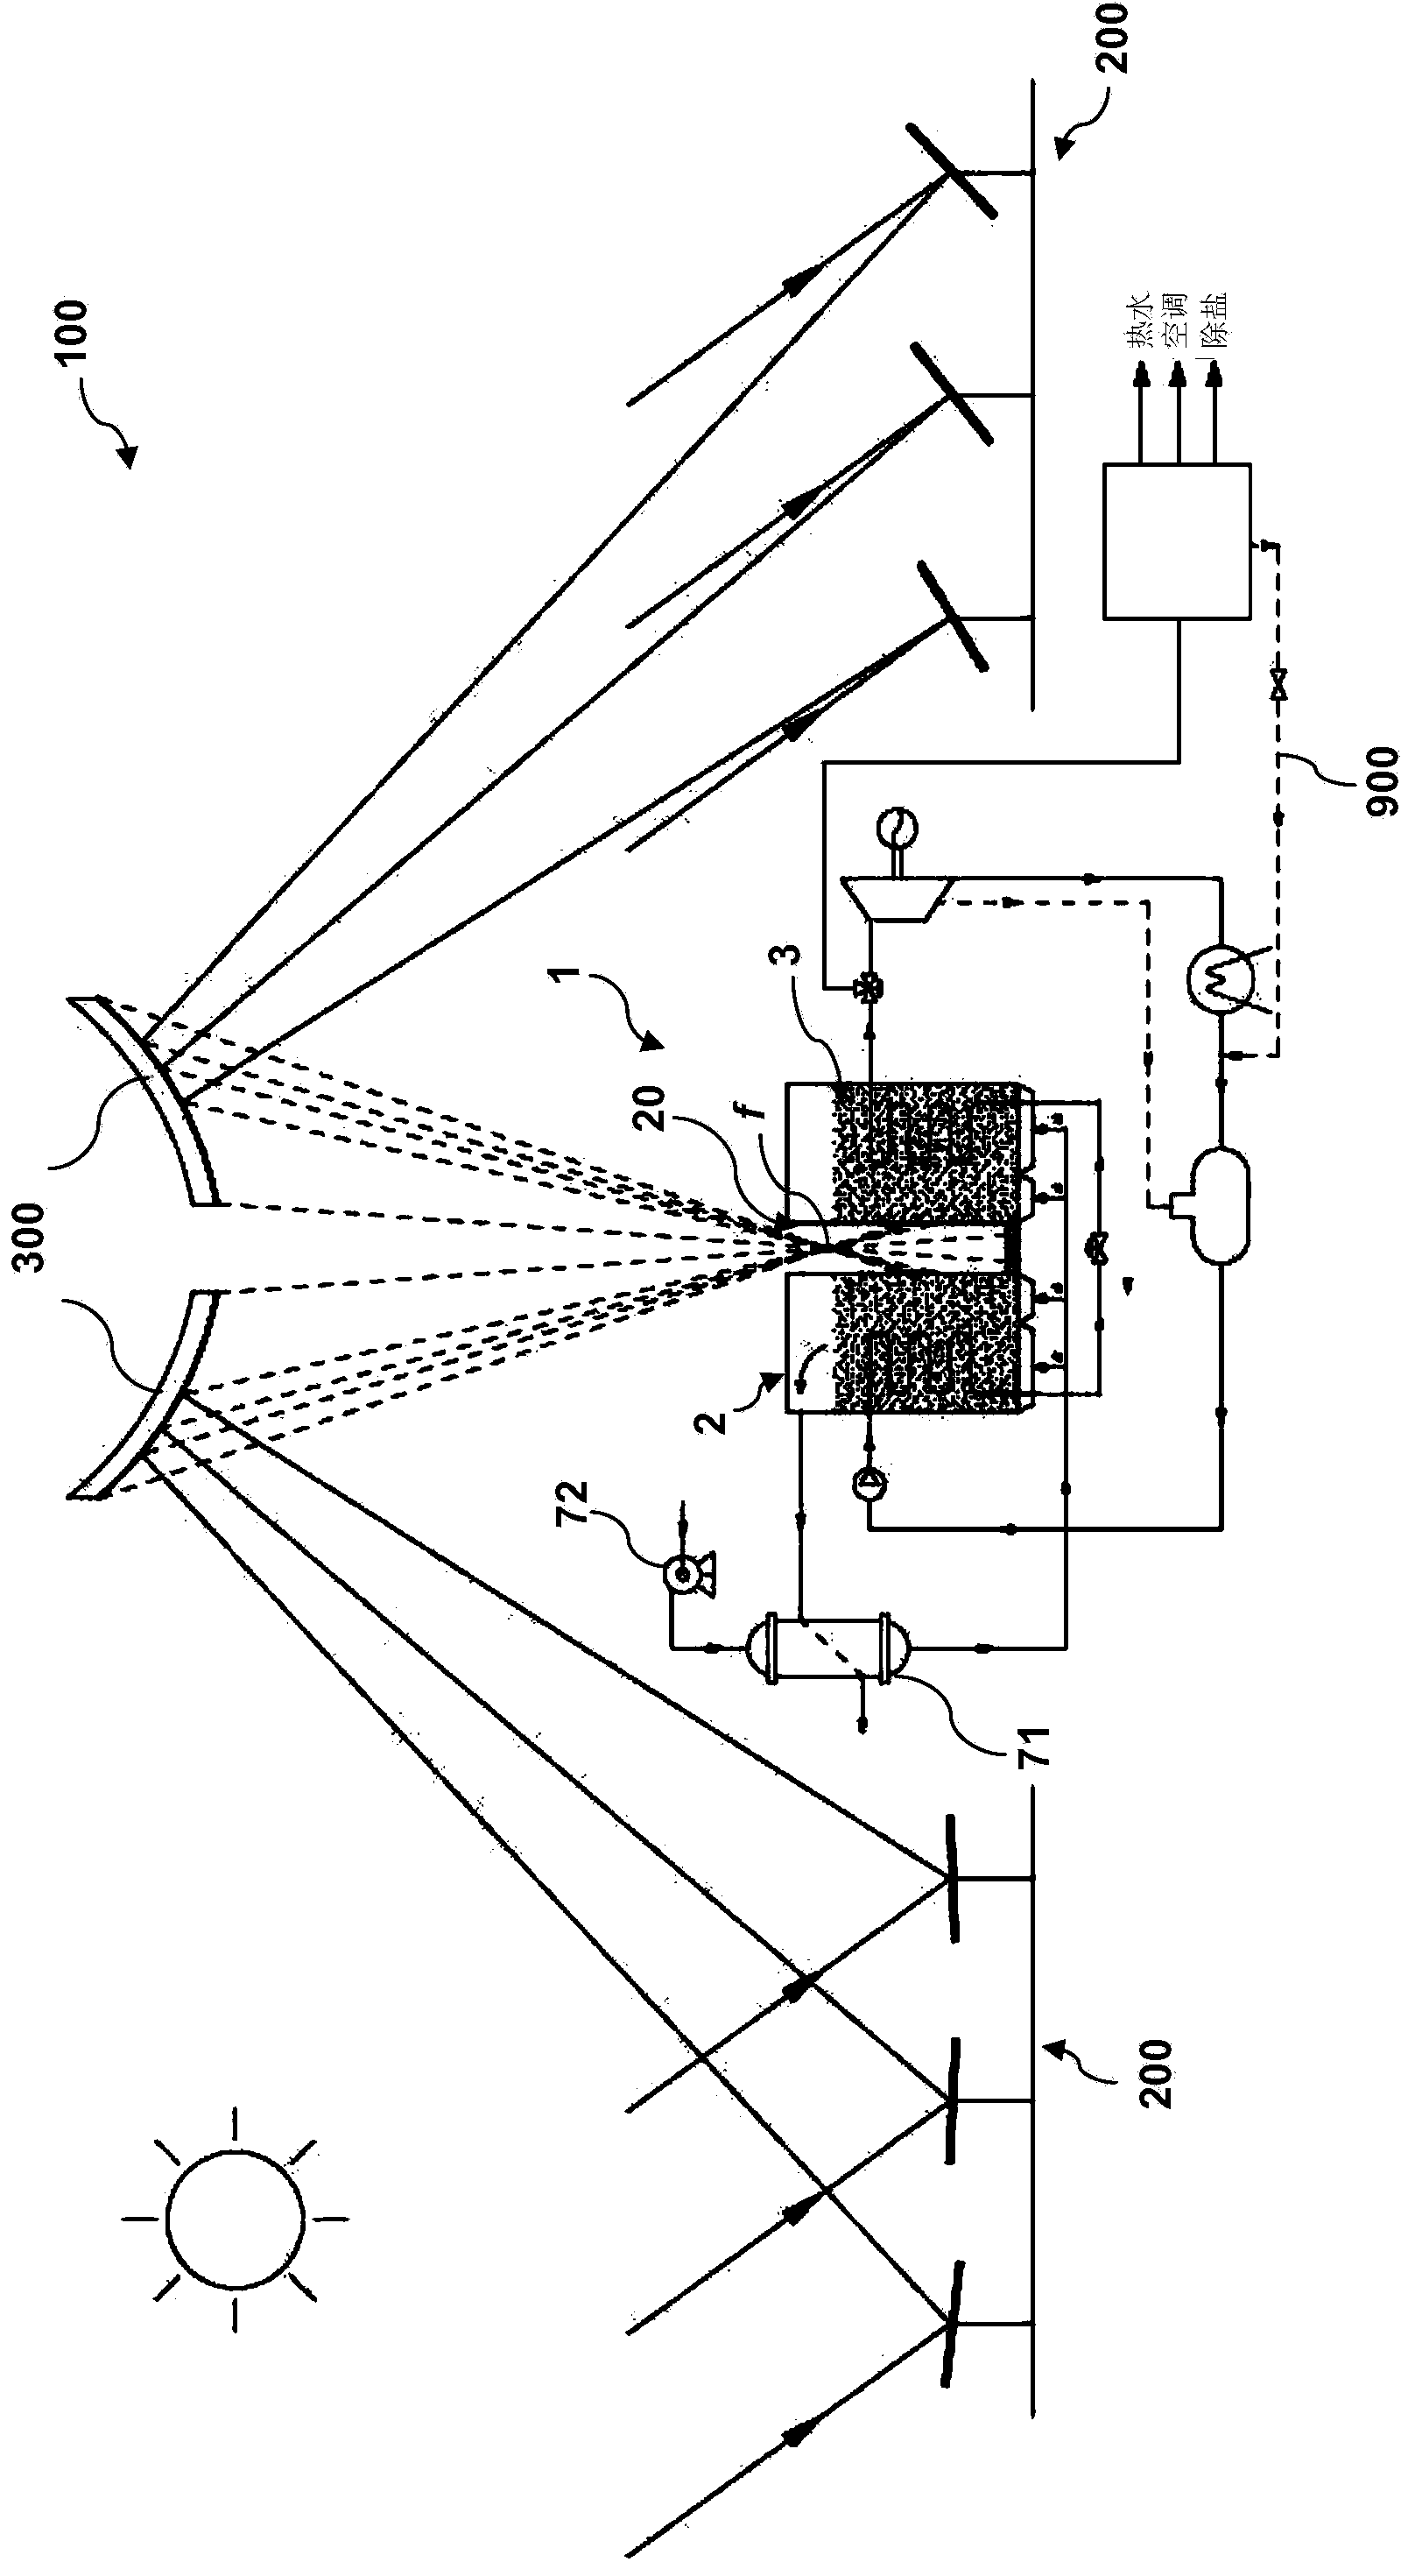 Device, system and method for high level of energetic efficiency for the storage and use of thermal energy of solar origin